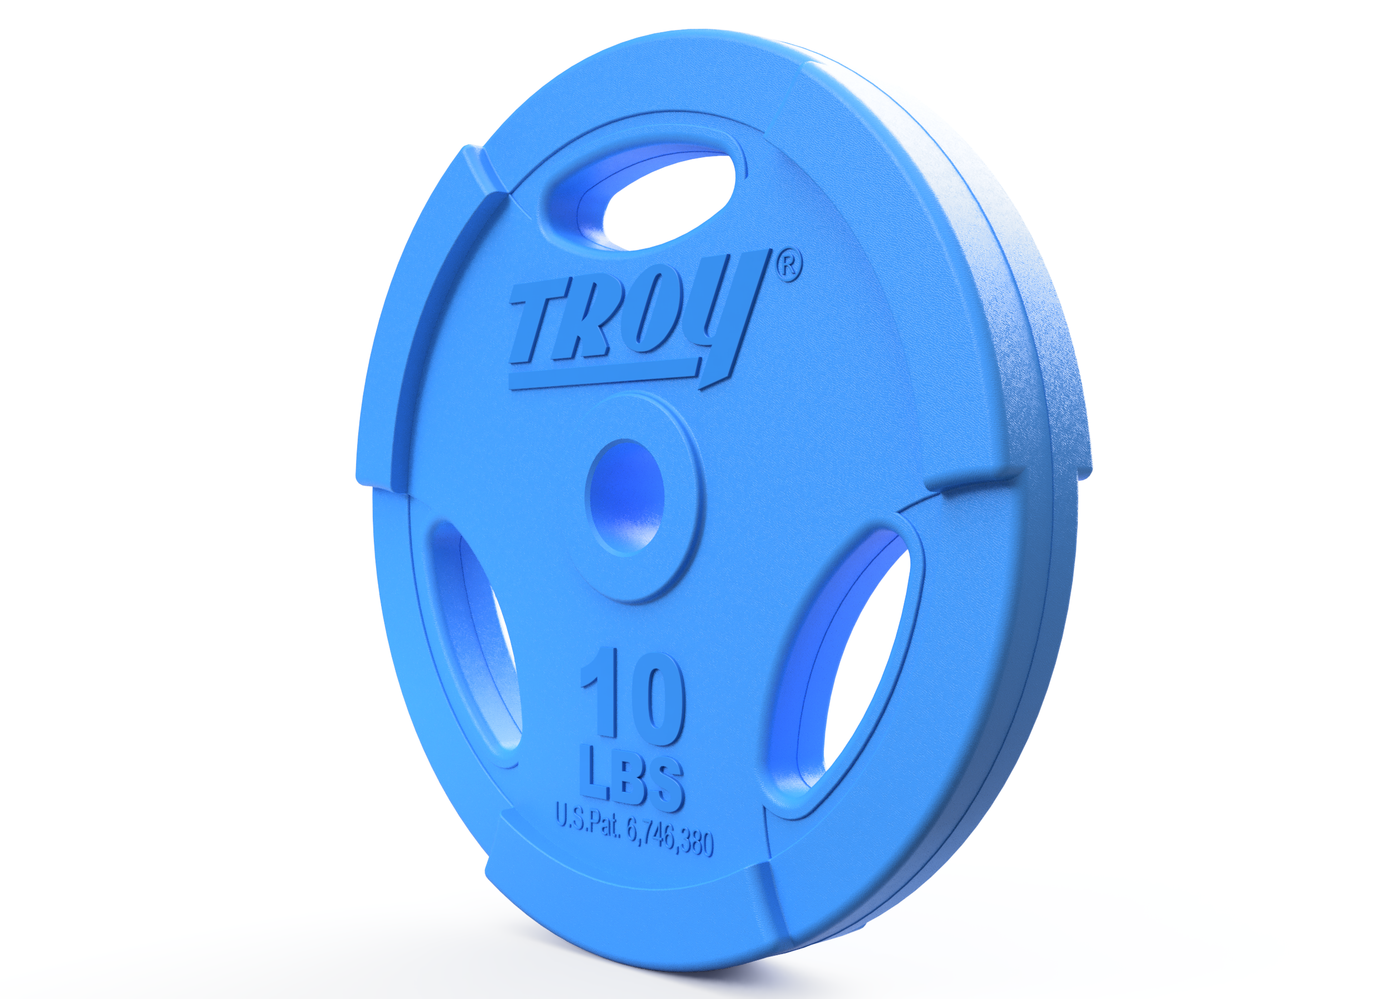 Troy Interlocking Color Grip Workout Plate